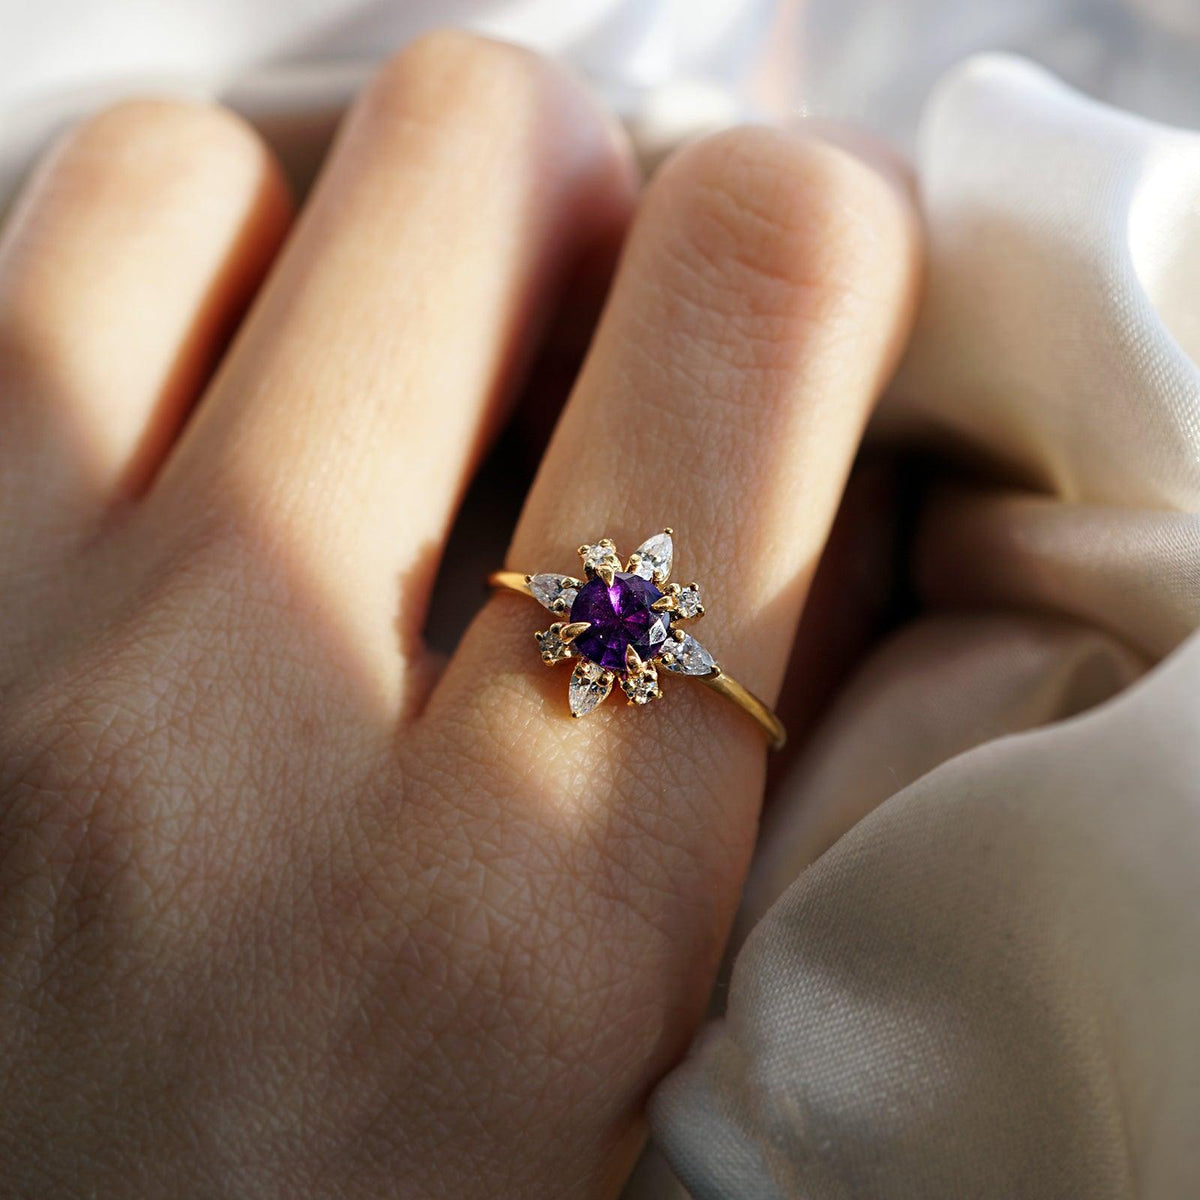 Amethyst Passion Flower Ring - Tippy Taste Jewelry